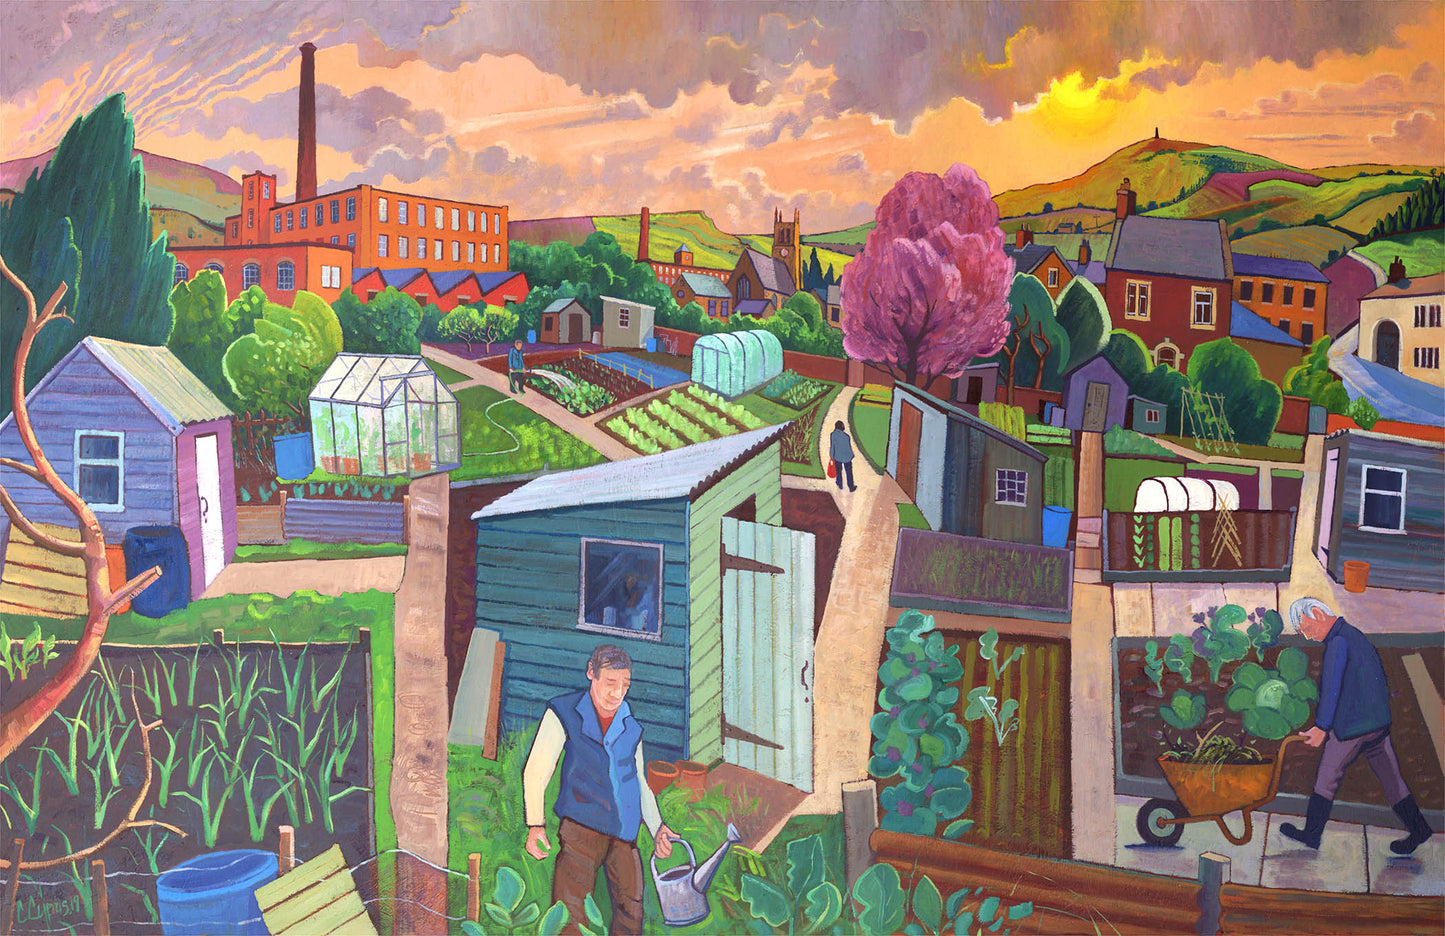 Reproduced from the original oil painting completed in 2019.  A detailed scene combining elements of beautiful landscape surrounding an allotment,  plot holders tending to their prize vegetables and flowers on a summers day at sunrise.  Actual size of artwork 54cm x35cm      Signed and embossed     Unique certificate of authentication     Limited run of 50     Printed on 300gsm archival quality paper using lightfast inks     Tube rolled perfect for worldwide shipping